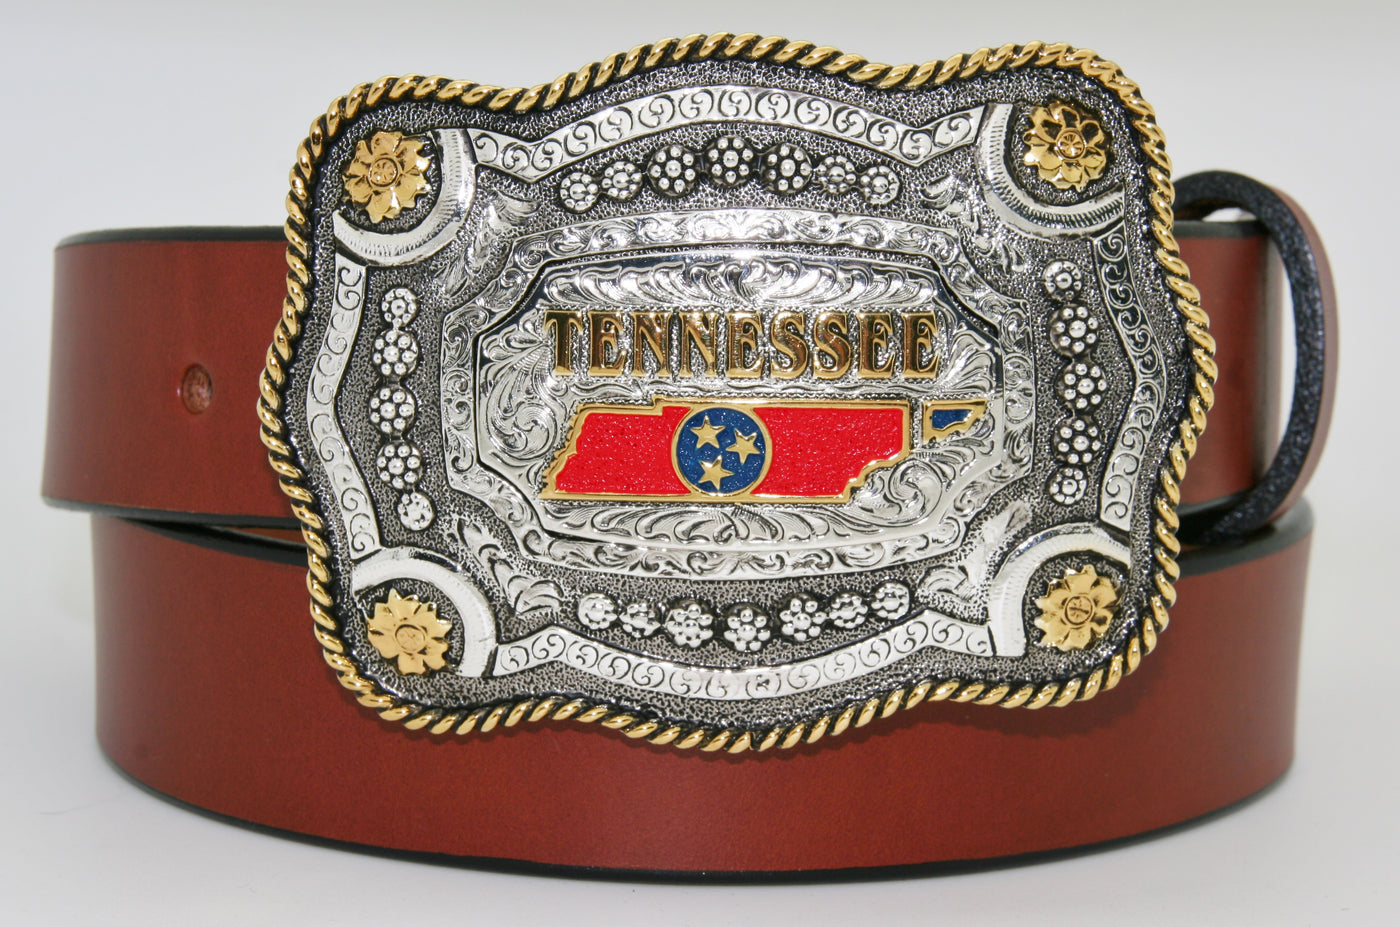 Two Tone Rope Edge Tennessee Belt Buckle Made in Mexico Dimensions 3 1/4" tall by 4 1/4" wide Fits Belts up to 1 3/4" wide Available online and in our shop in Smyrna, TN, just outside of Nashville